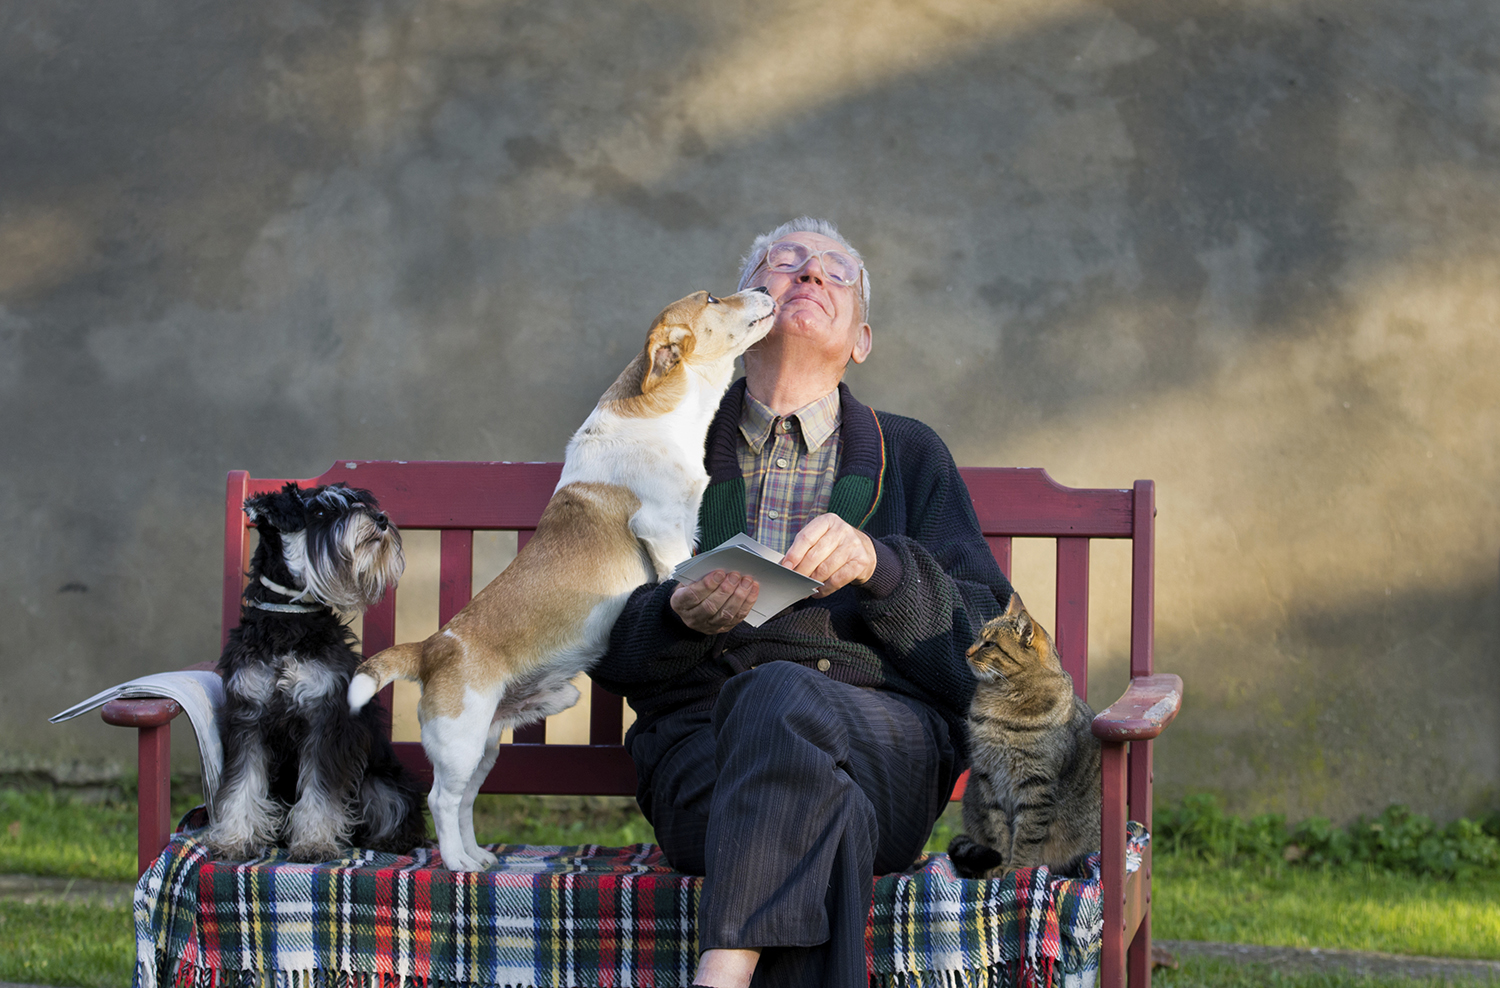  we deliver love  seniors with pets have 21% less doctor visits. we feed pets too  